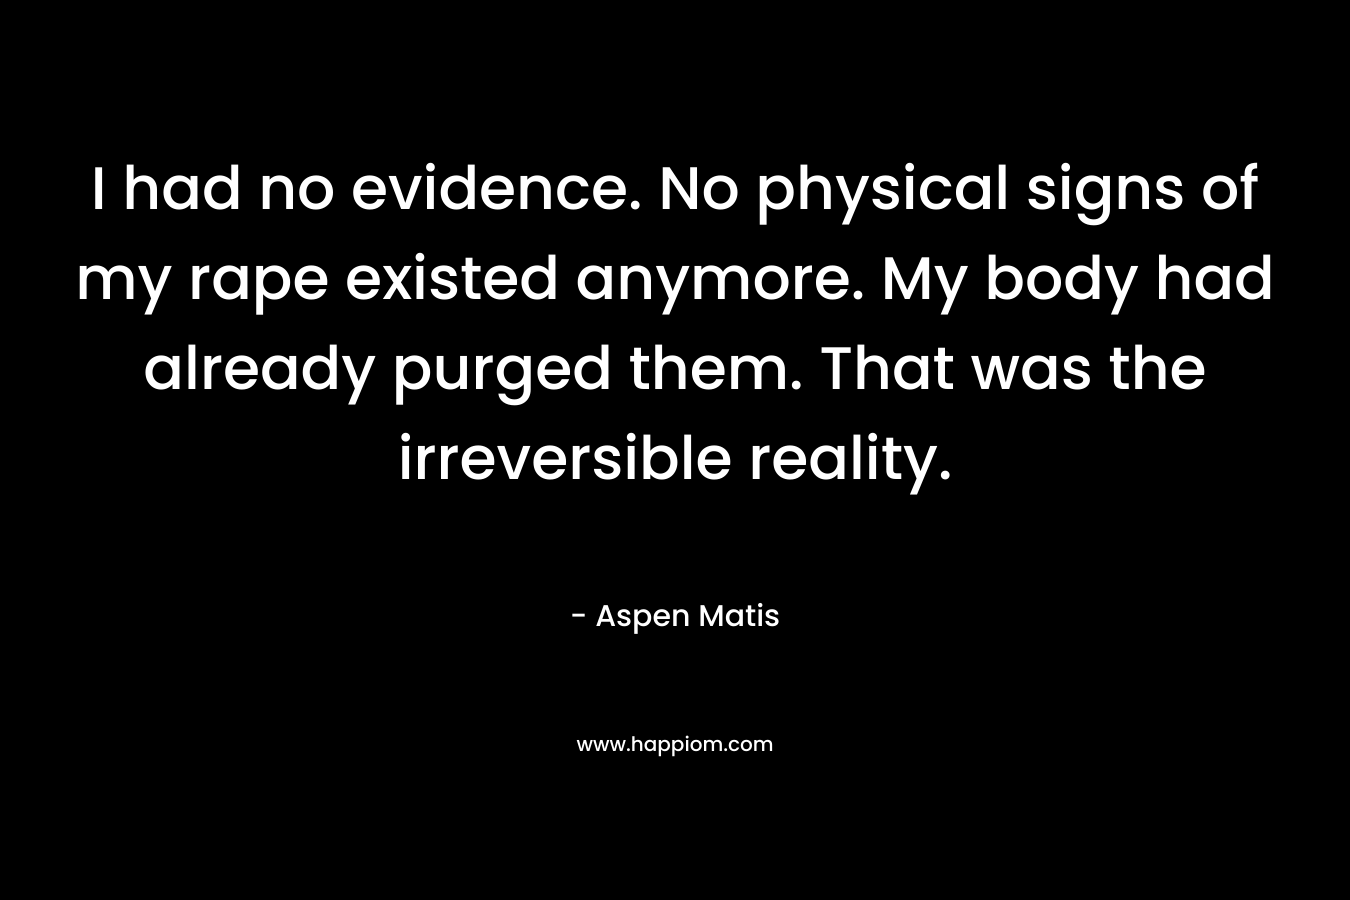 I had no evidence. No physical signs of my rape existed anymore. My body had already purged them. That was the irreversible reality. – Aspen Matis